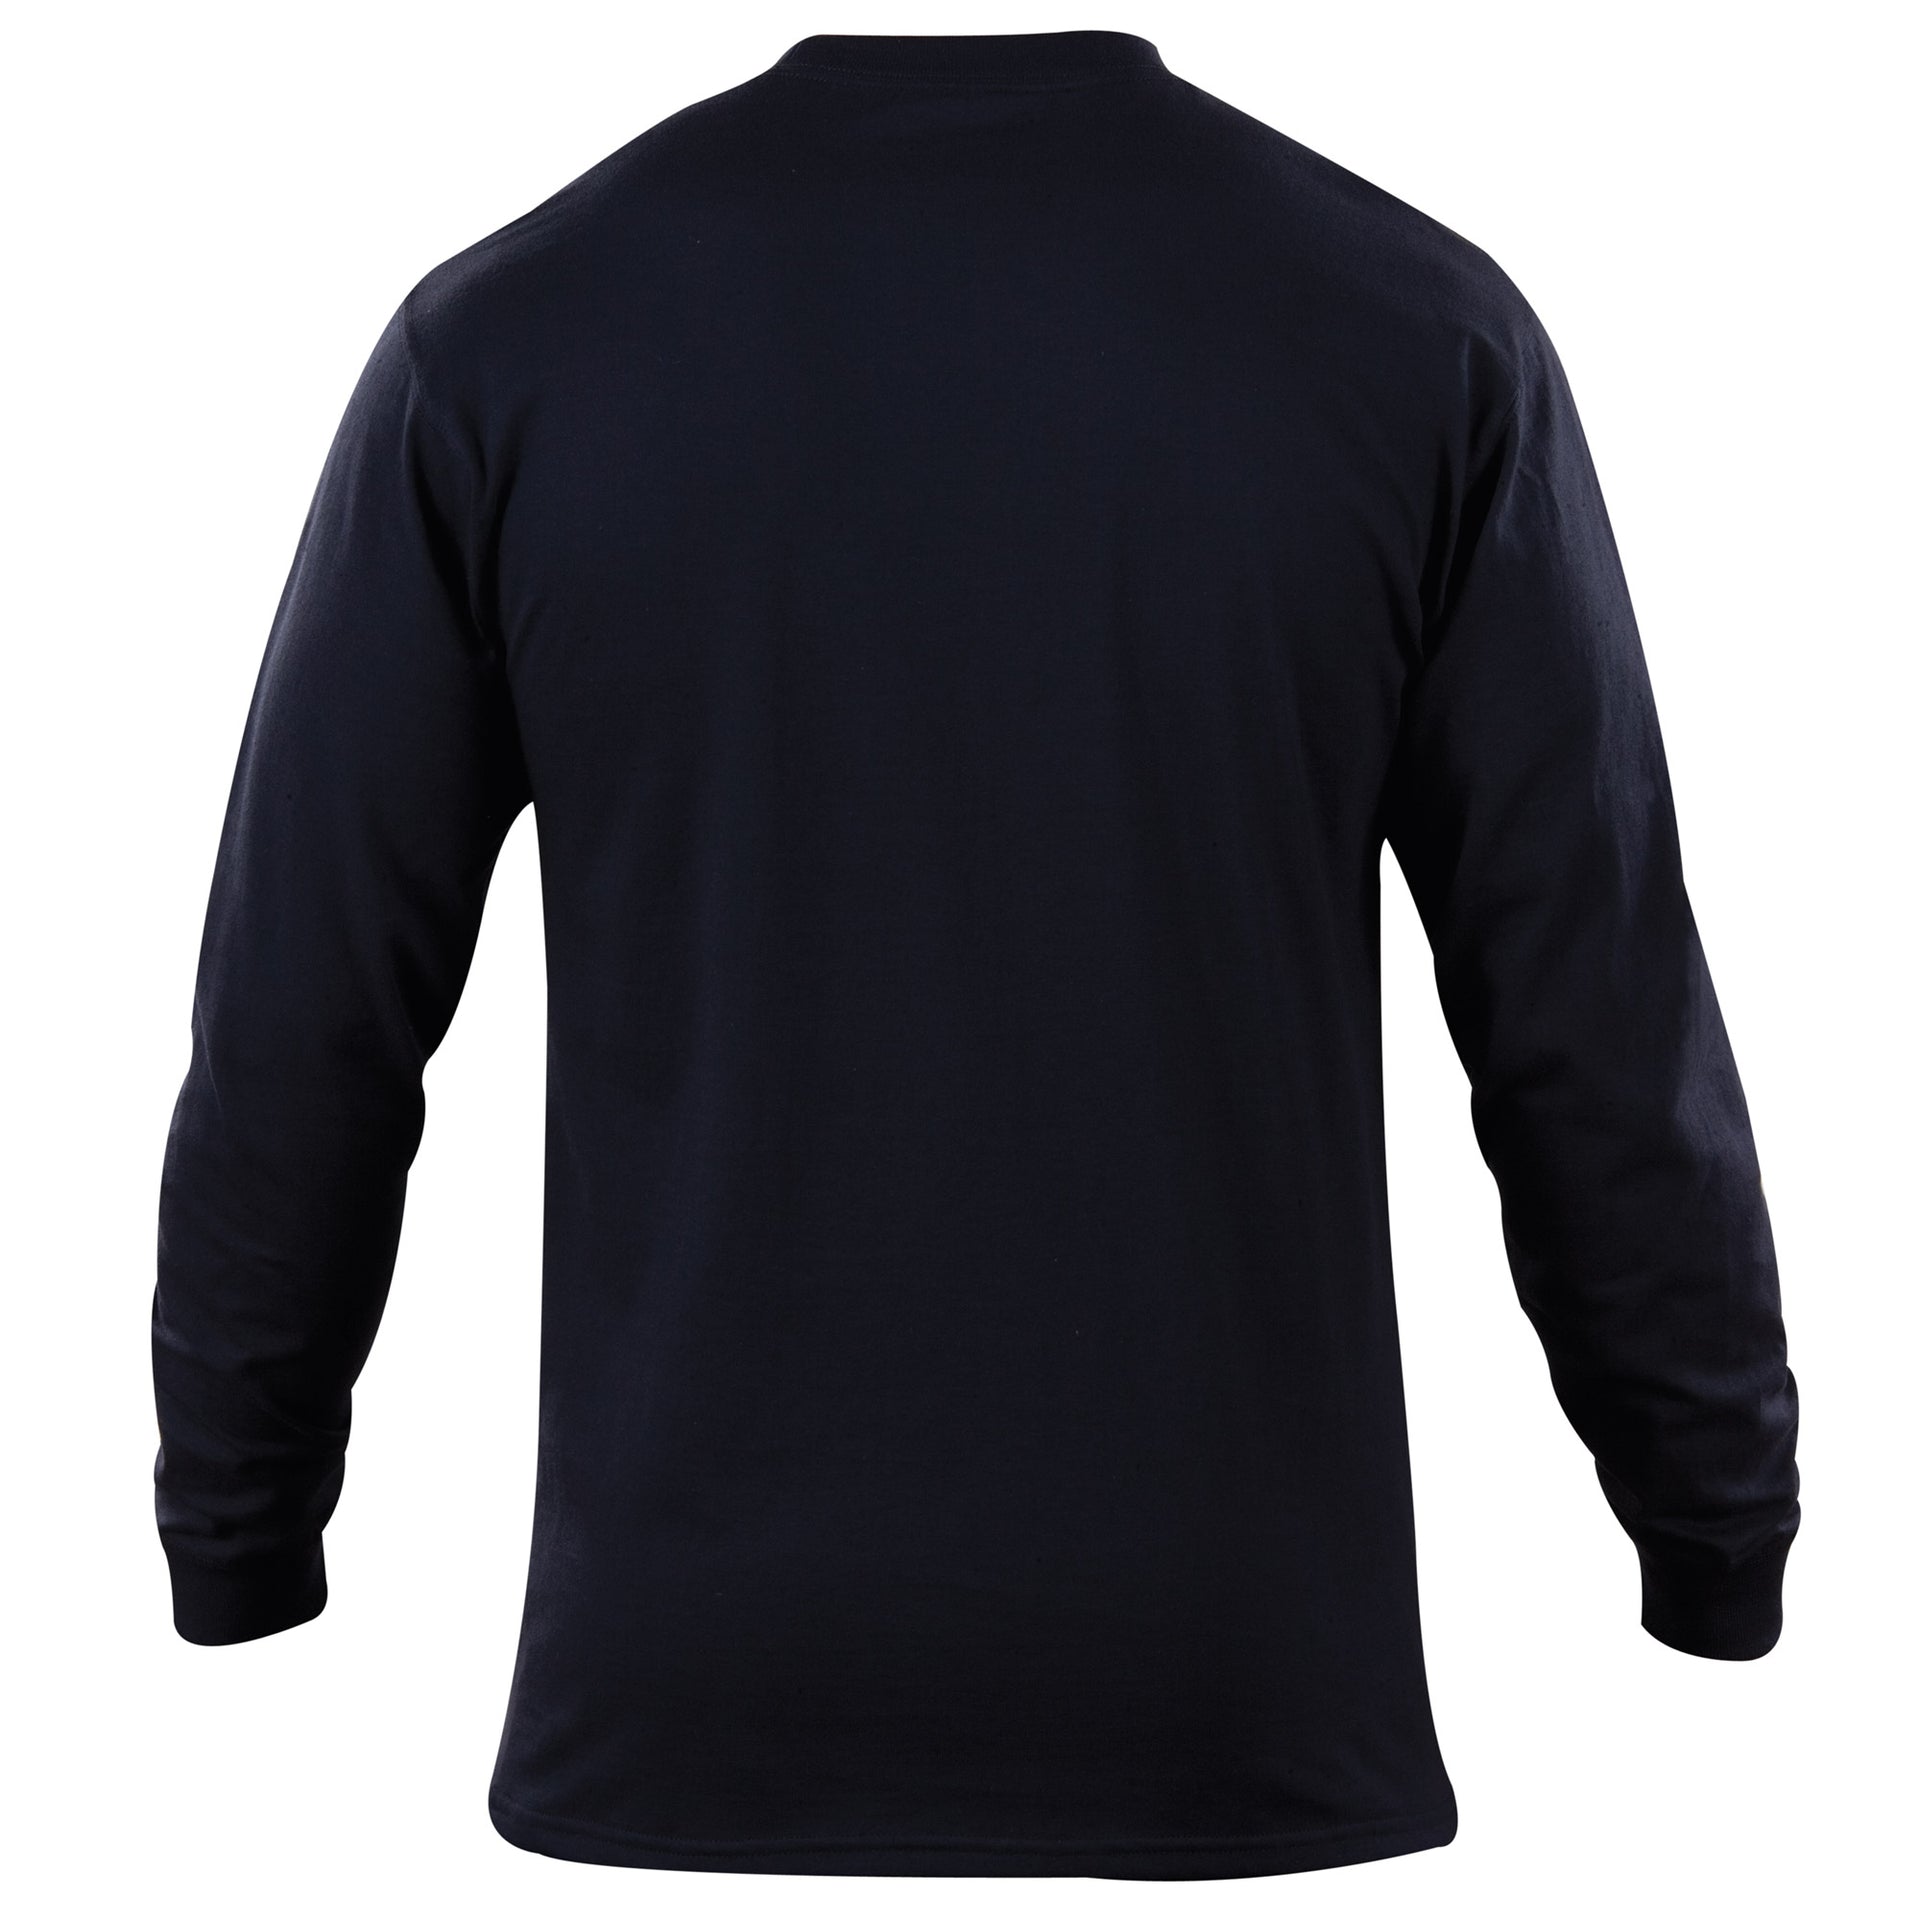 5.11 Tactical Station Wear Long Sleeve T-Shirt (40052) | The Fire Center | Fuego Fire Center | Firefighter Gear | The consistent choice of fire professionals around the world, the 5.11® Station Wear Long Sleeve T-Shirt combines rugged construction, lasting comfort, and a professional profile that keeps you looking your best. 